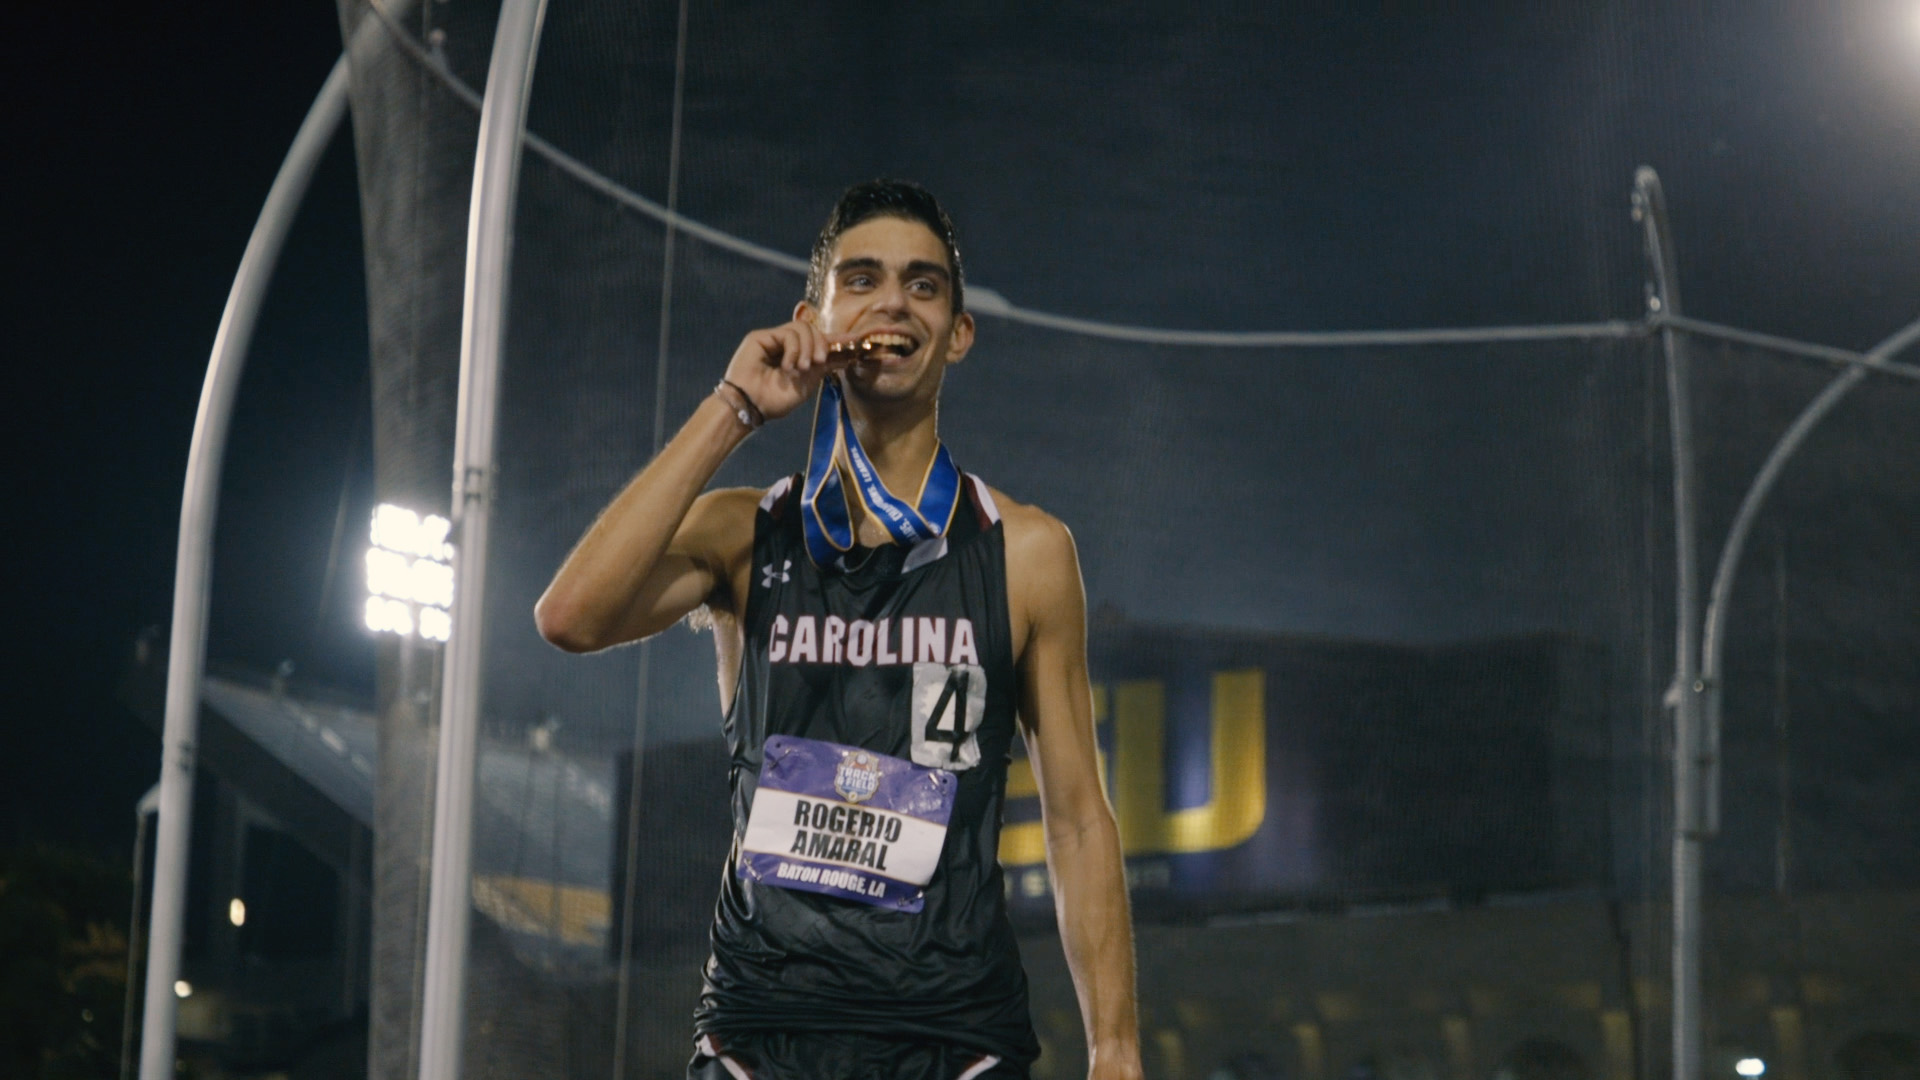 Amaral Snatches Bronze in Opening Day of SEC Outdoor Championships